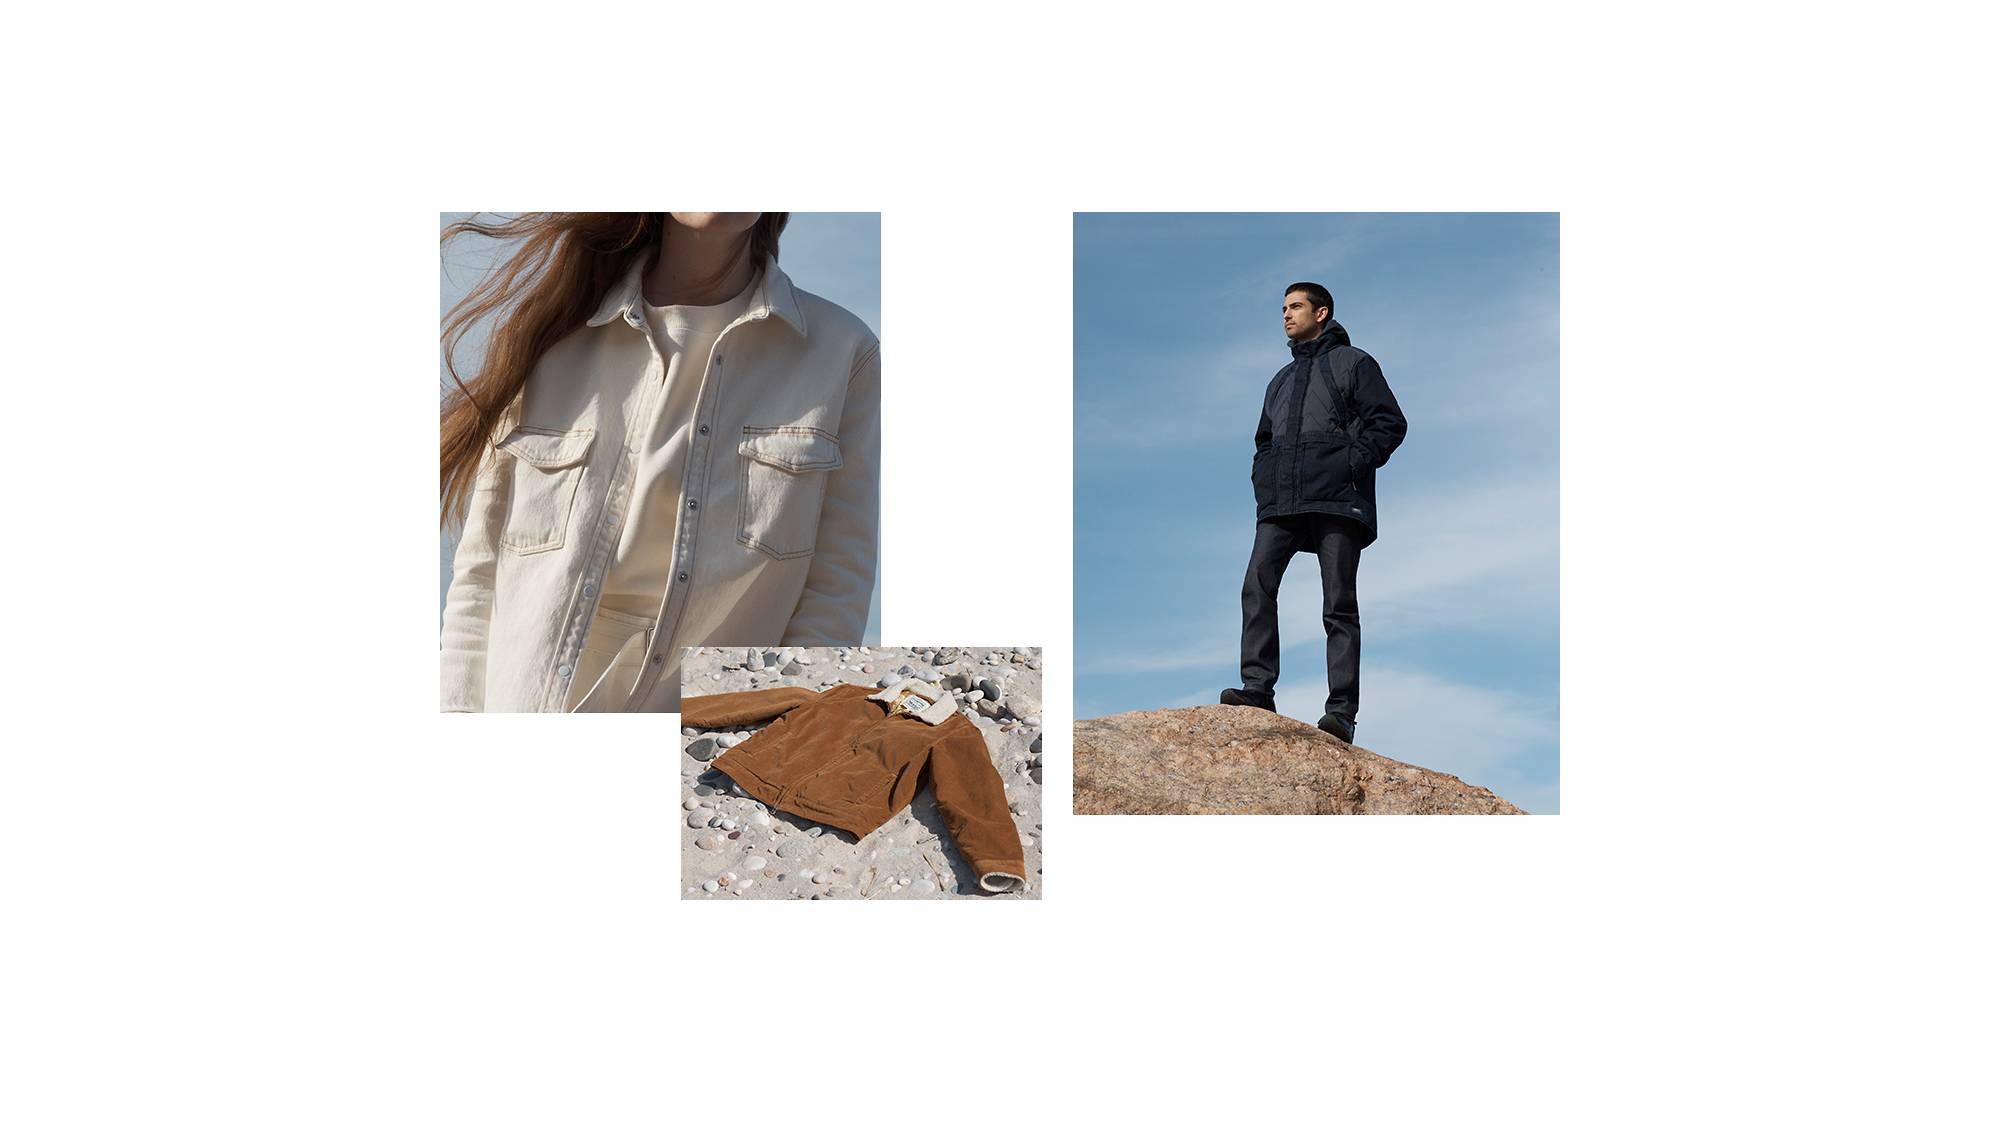 A collage of a woman wearing a white tee and denim jacket, a camel colored sherpa jacket on rocky sand, and a man standing on a boulder wearing black denim and a black jacket.